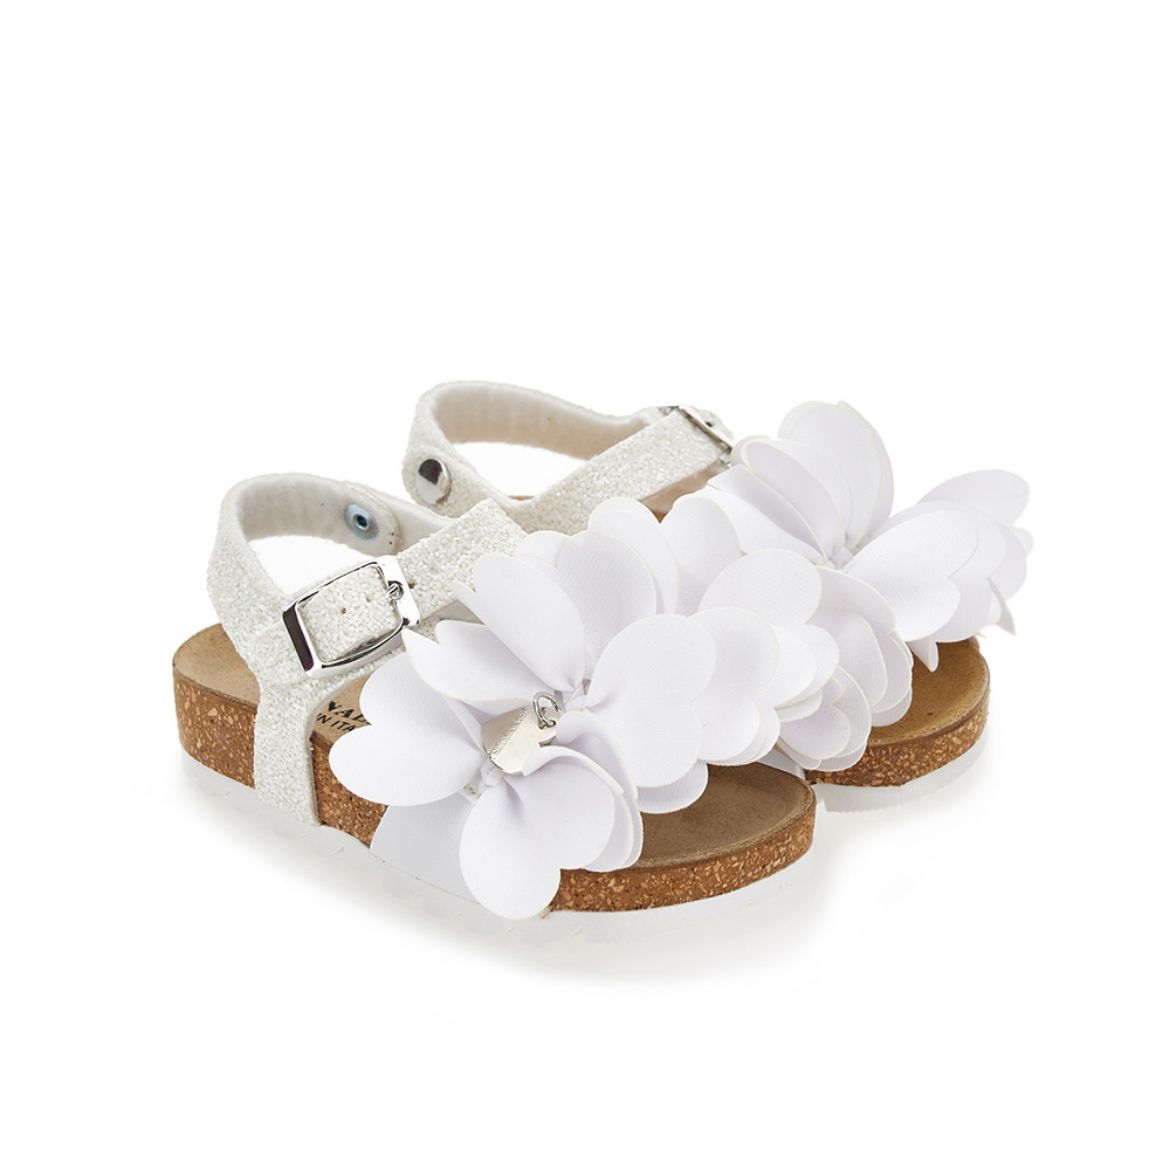 Picture of Monnalisa Girls White Sandals